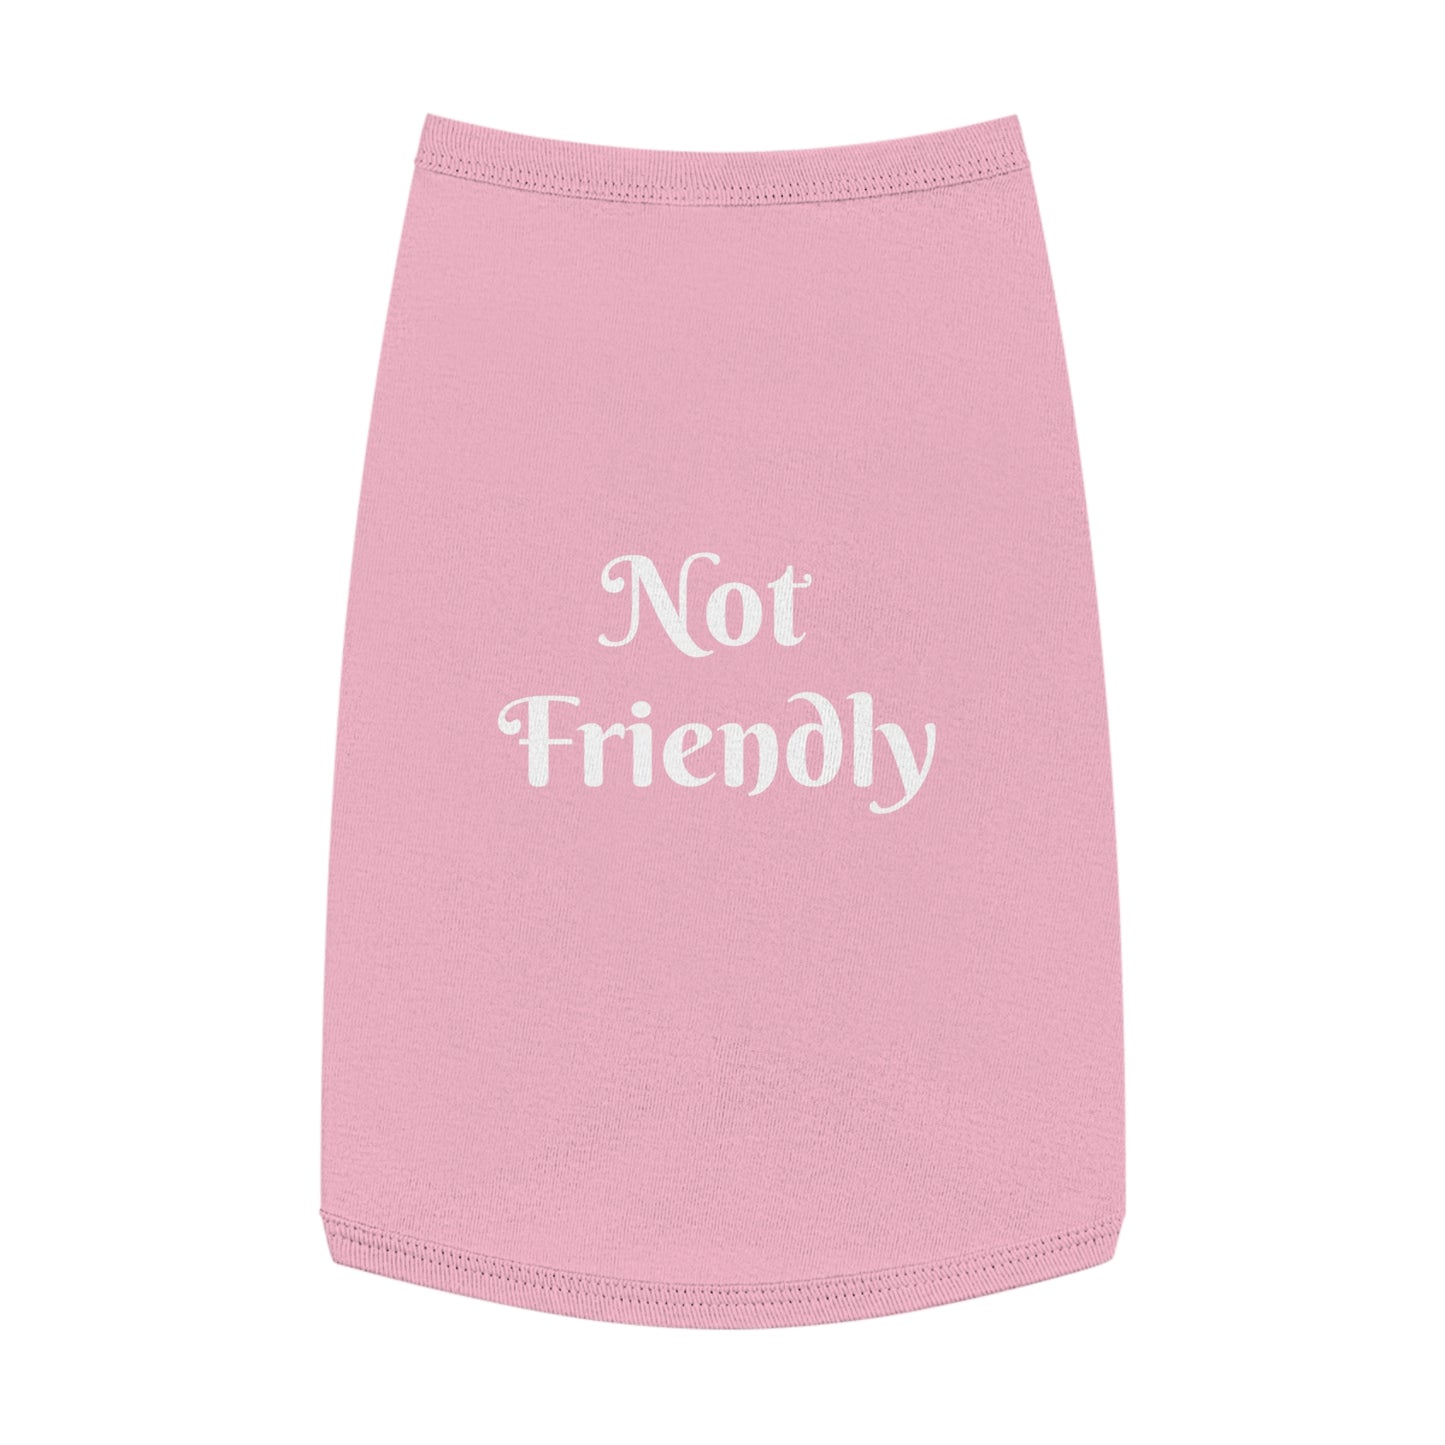 Not Friendly Pet Tank Top - A Clear Message for Your Pet